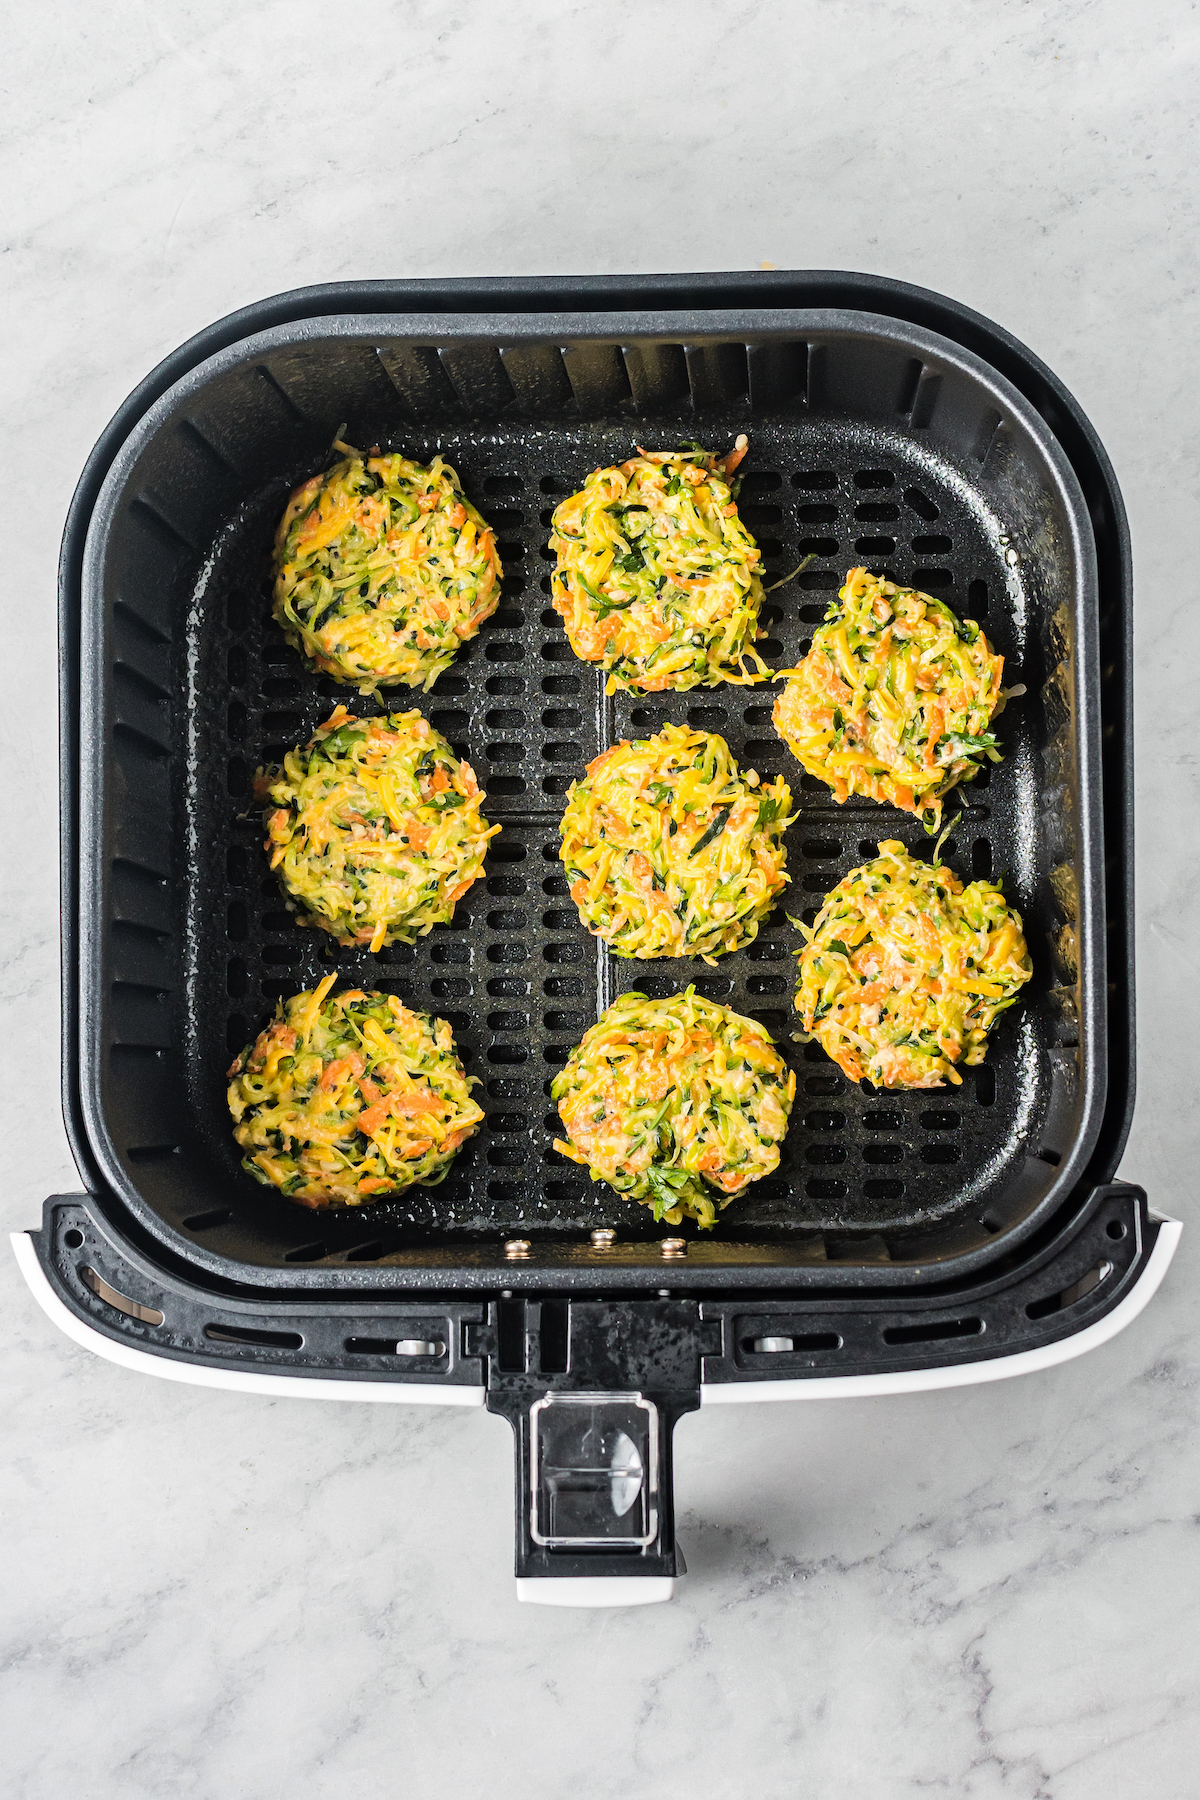 Veggie fritters lined up in the basket of an air fryer.